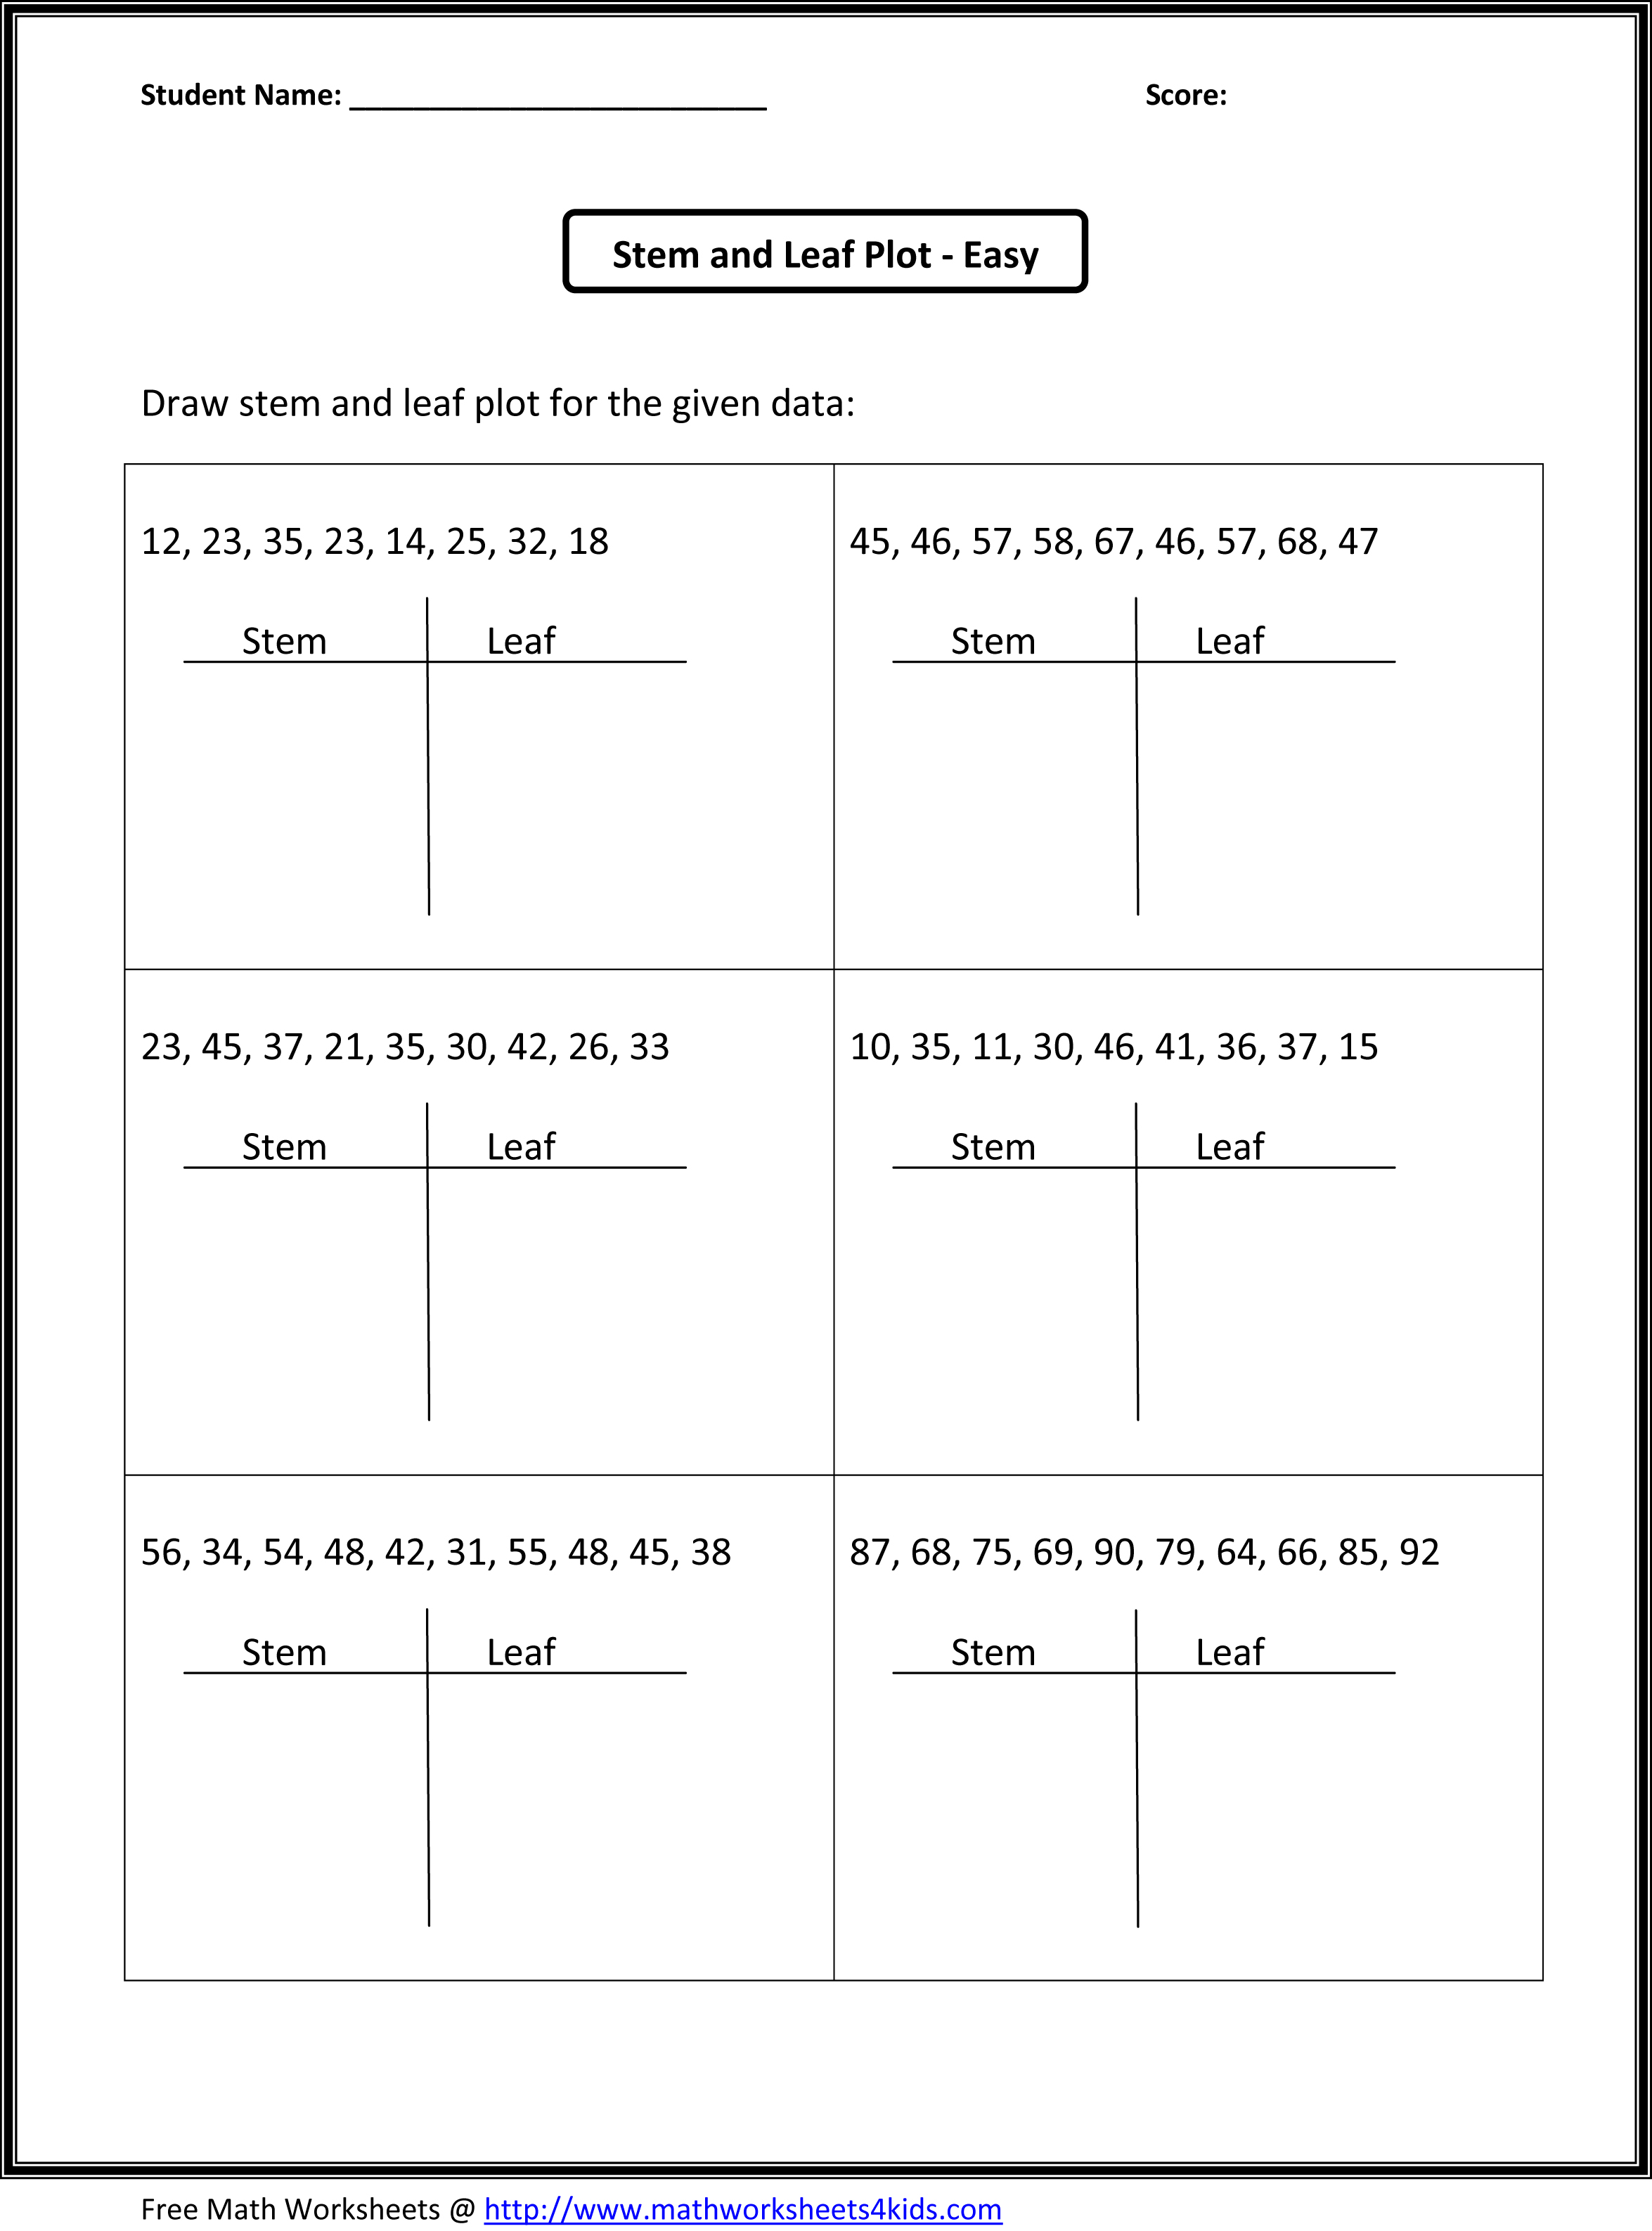 14 Best Images Of 7th Grade Writing Worksheets 7th Grade Printable Worksheets 7th Grade Math